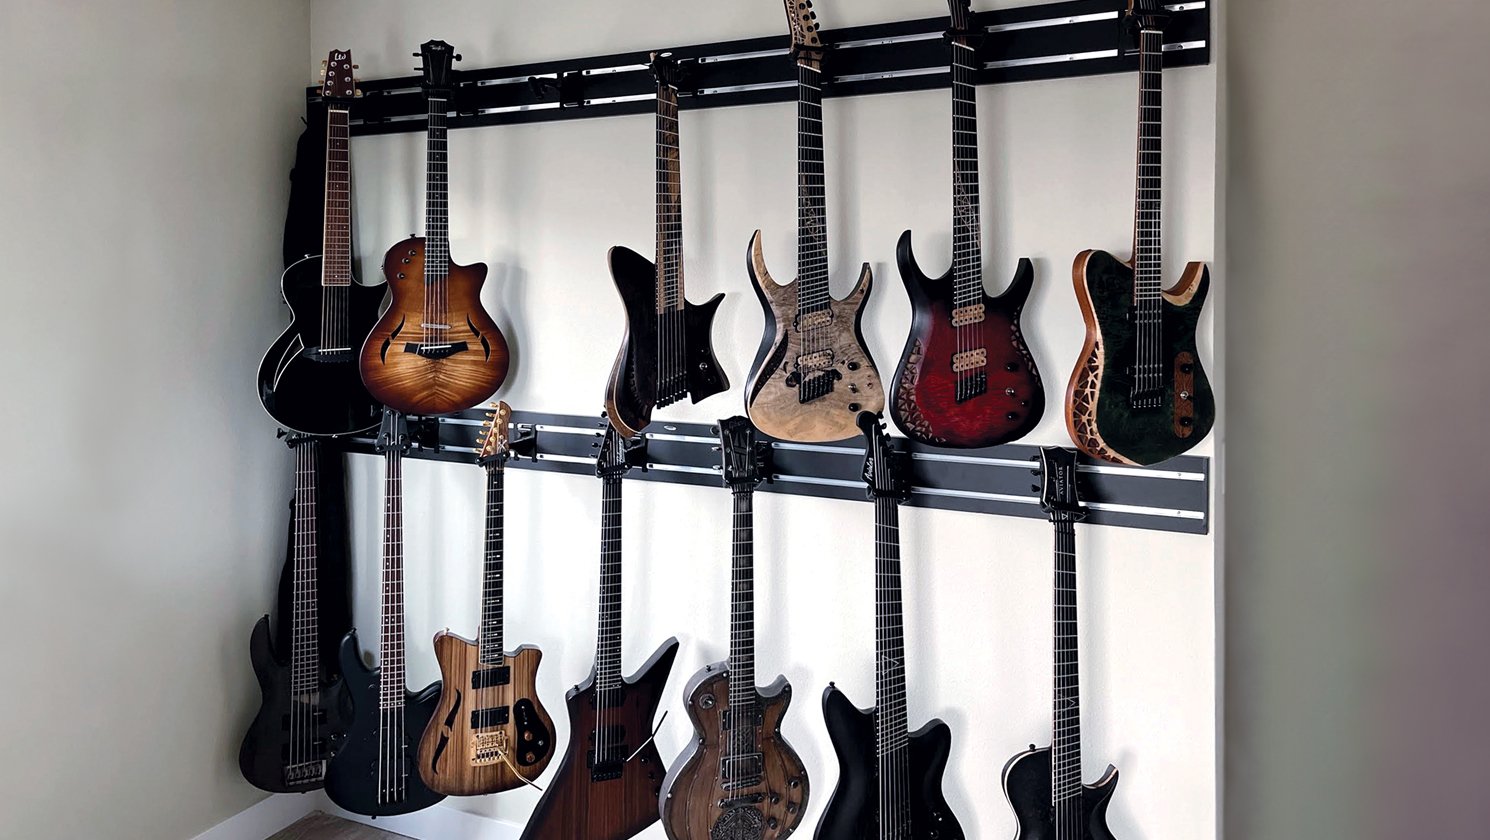 Guitar hangers used in alcove of a room